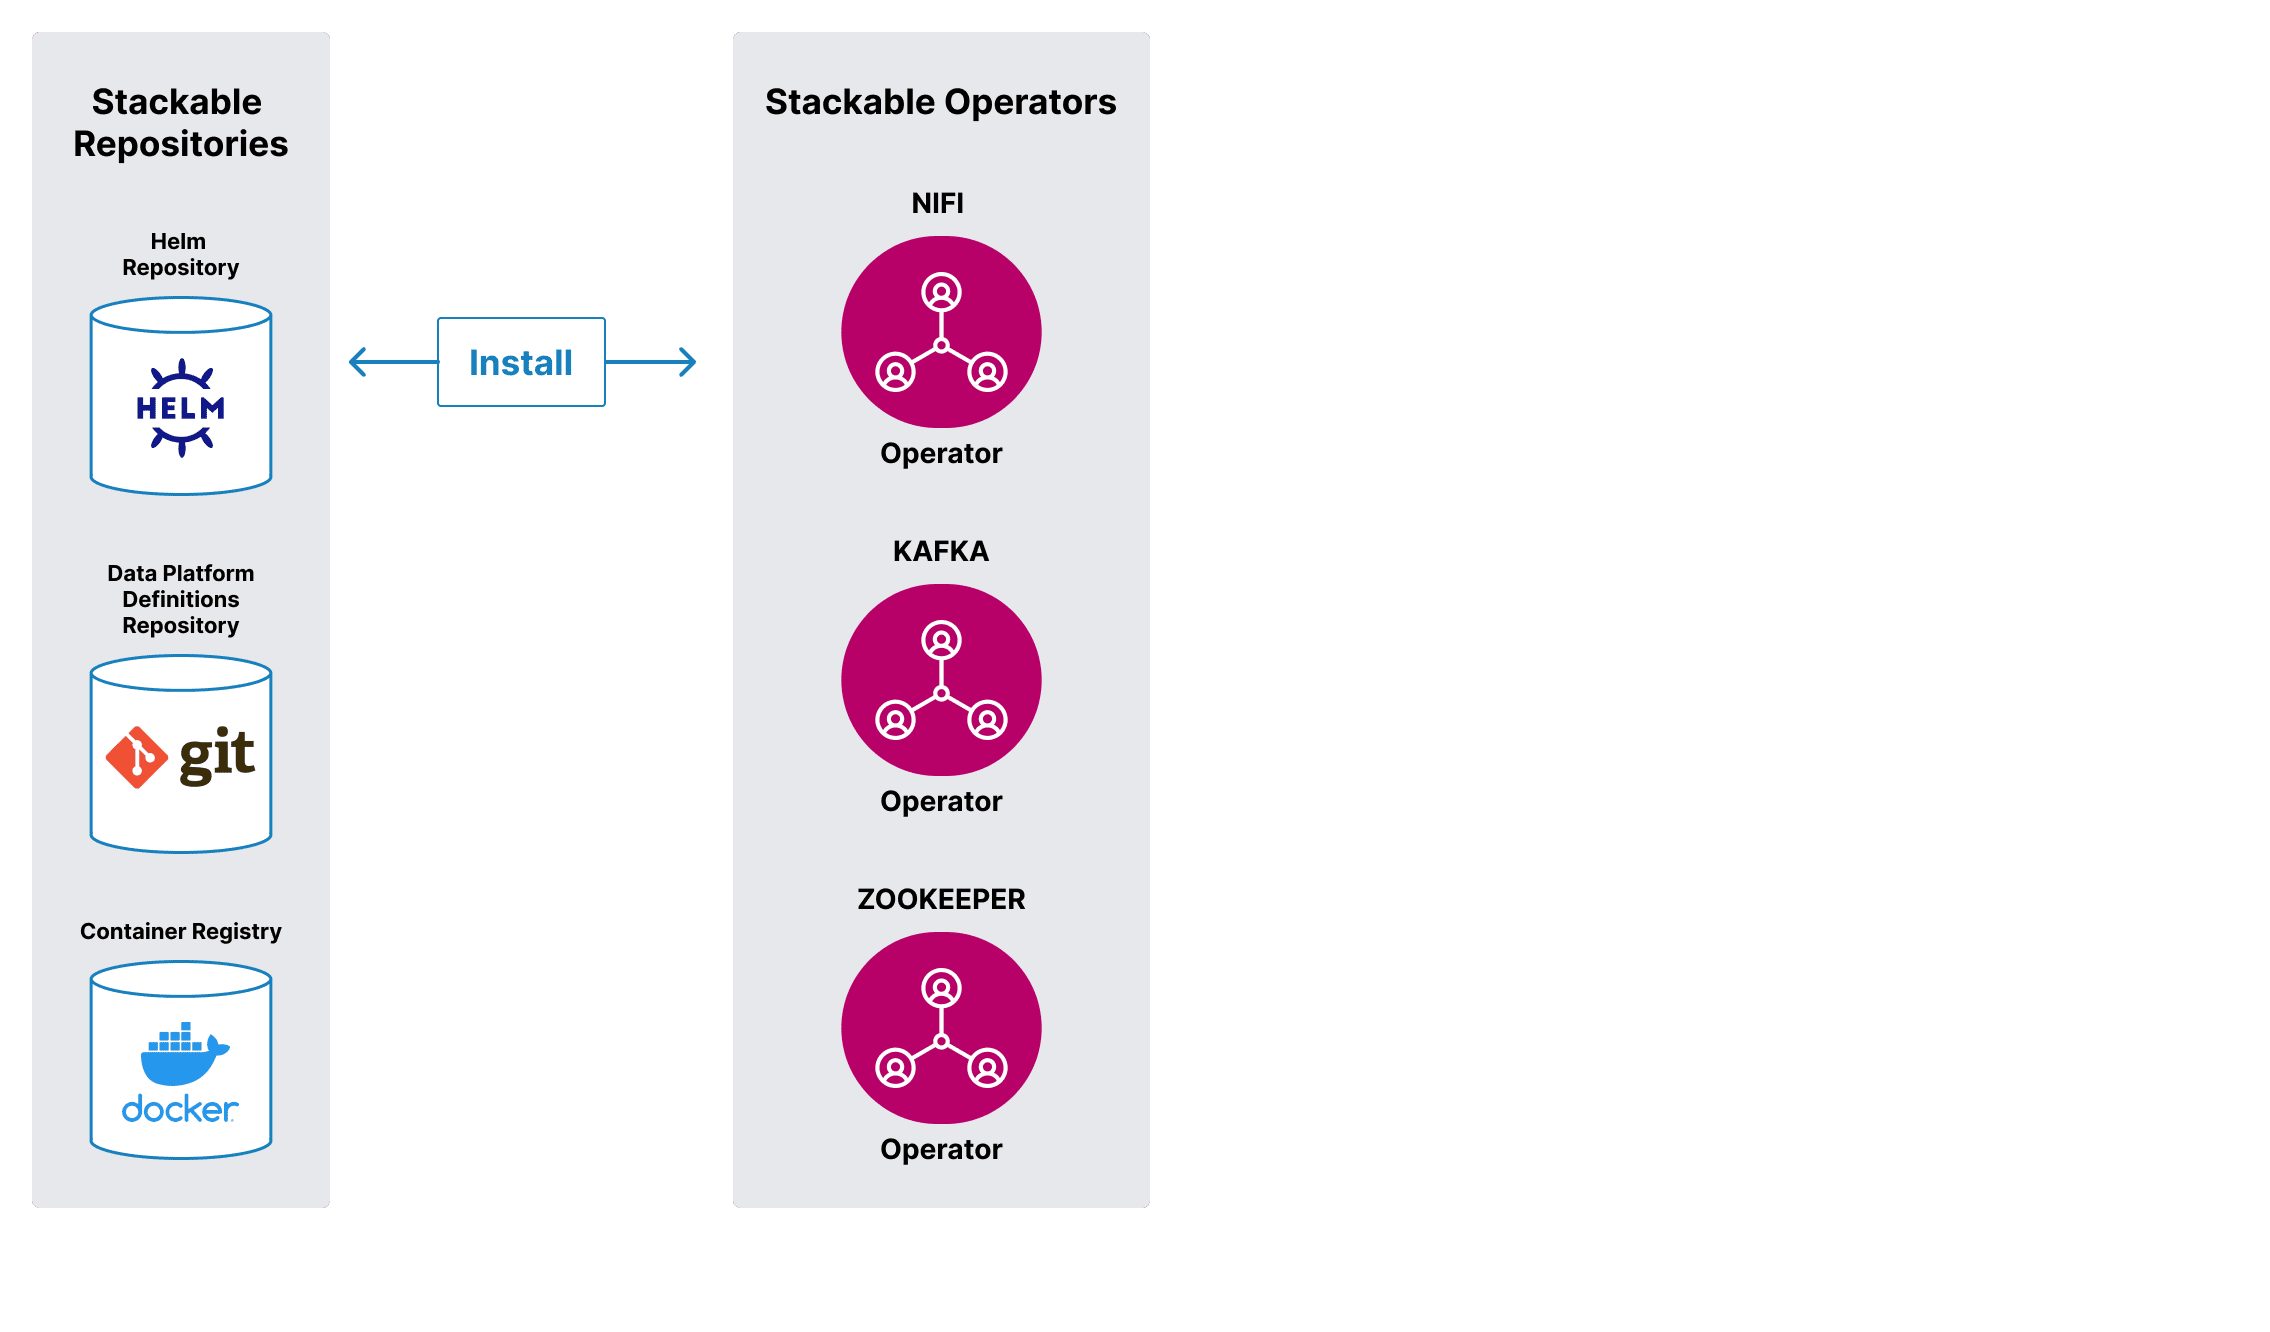 Illustration of Stackable operators and repositories